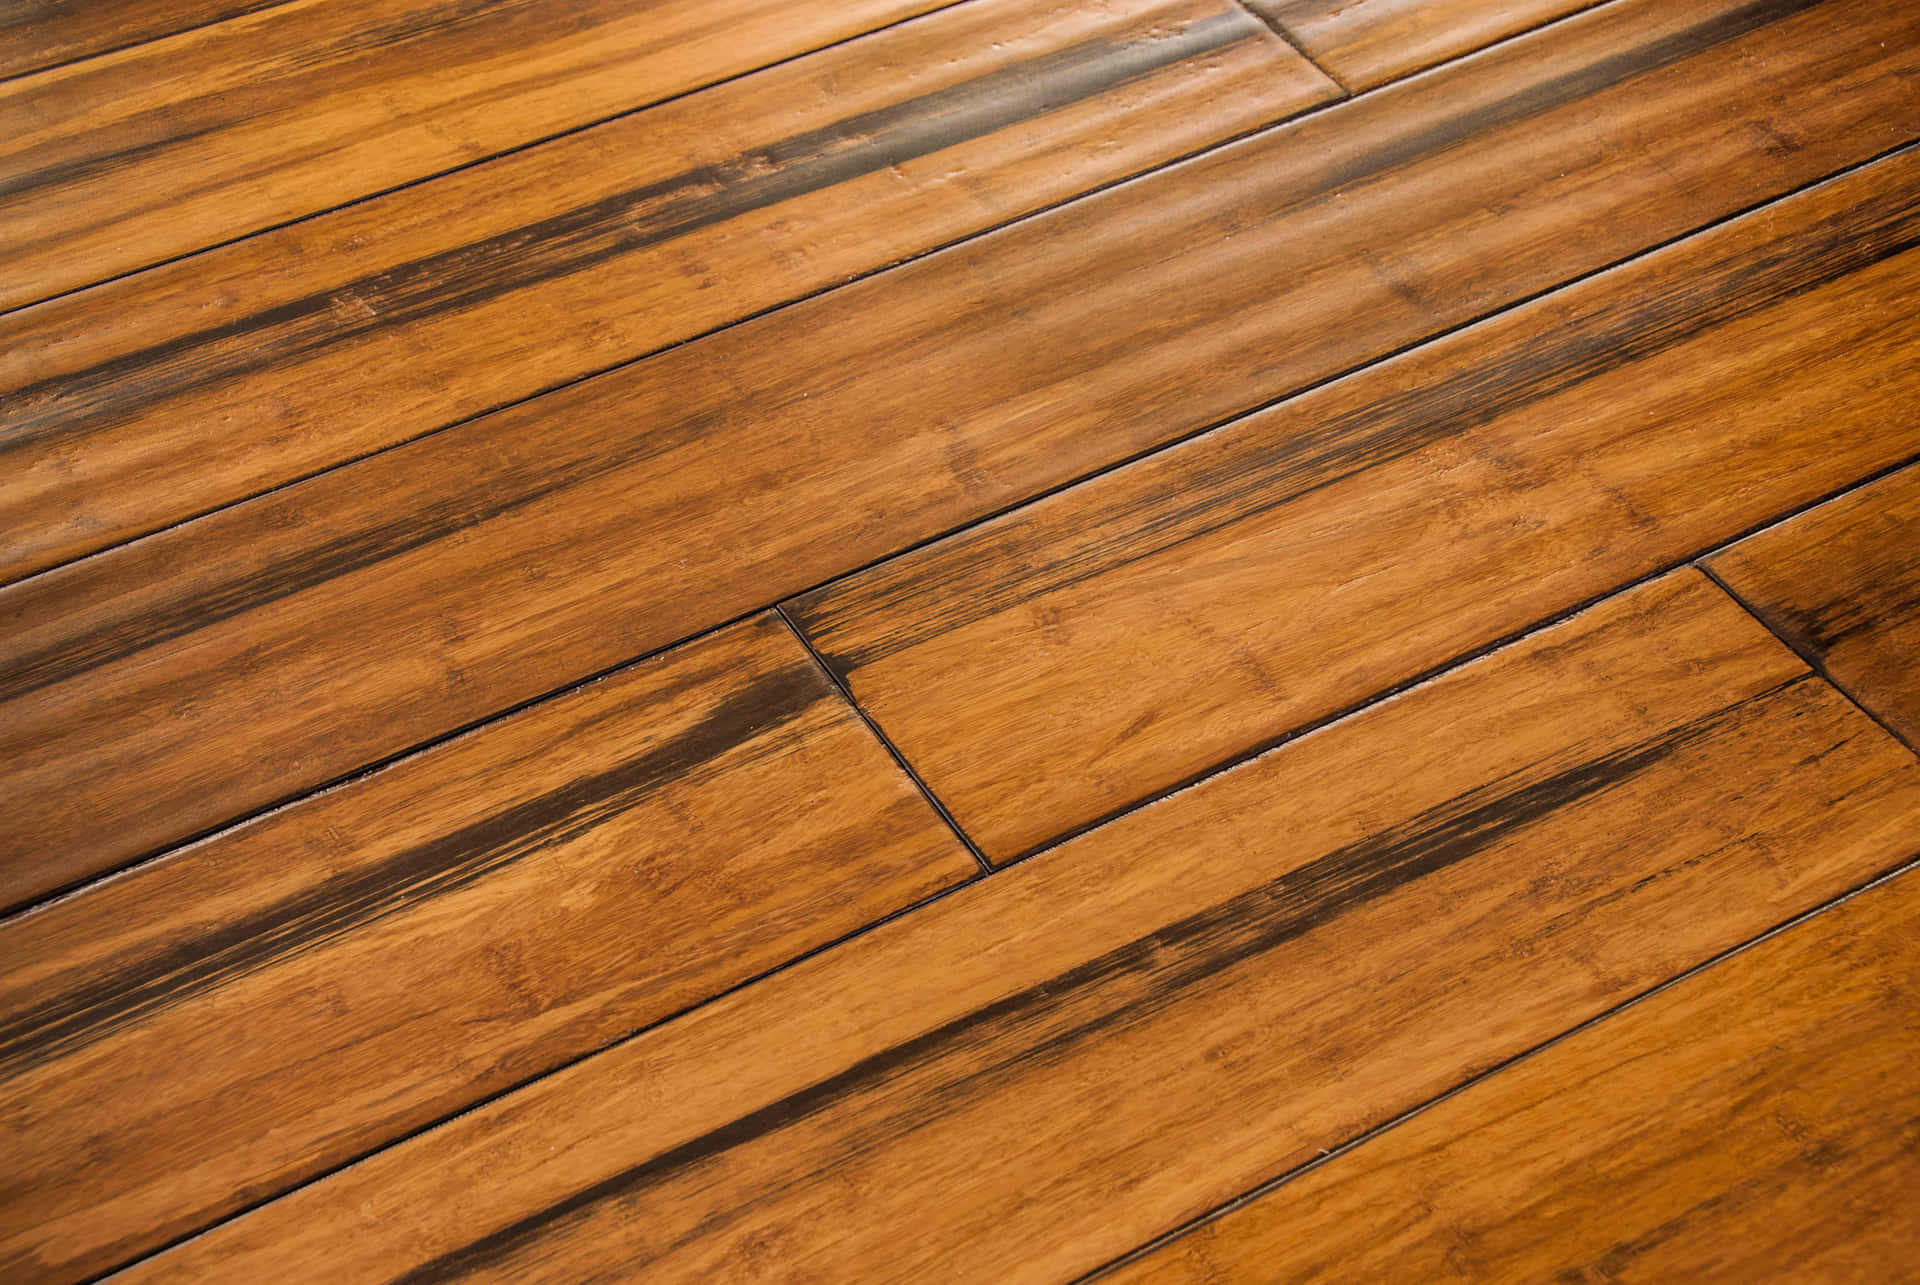 A Close Up Of A Wooden Floor With Wood Grain